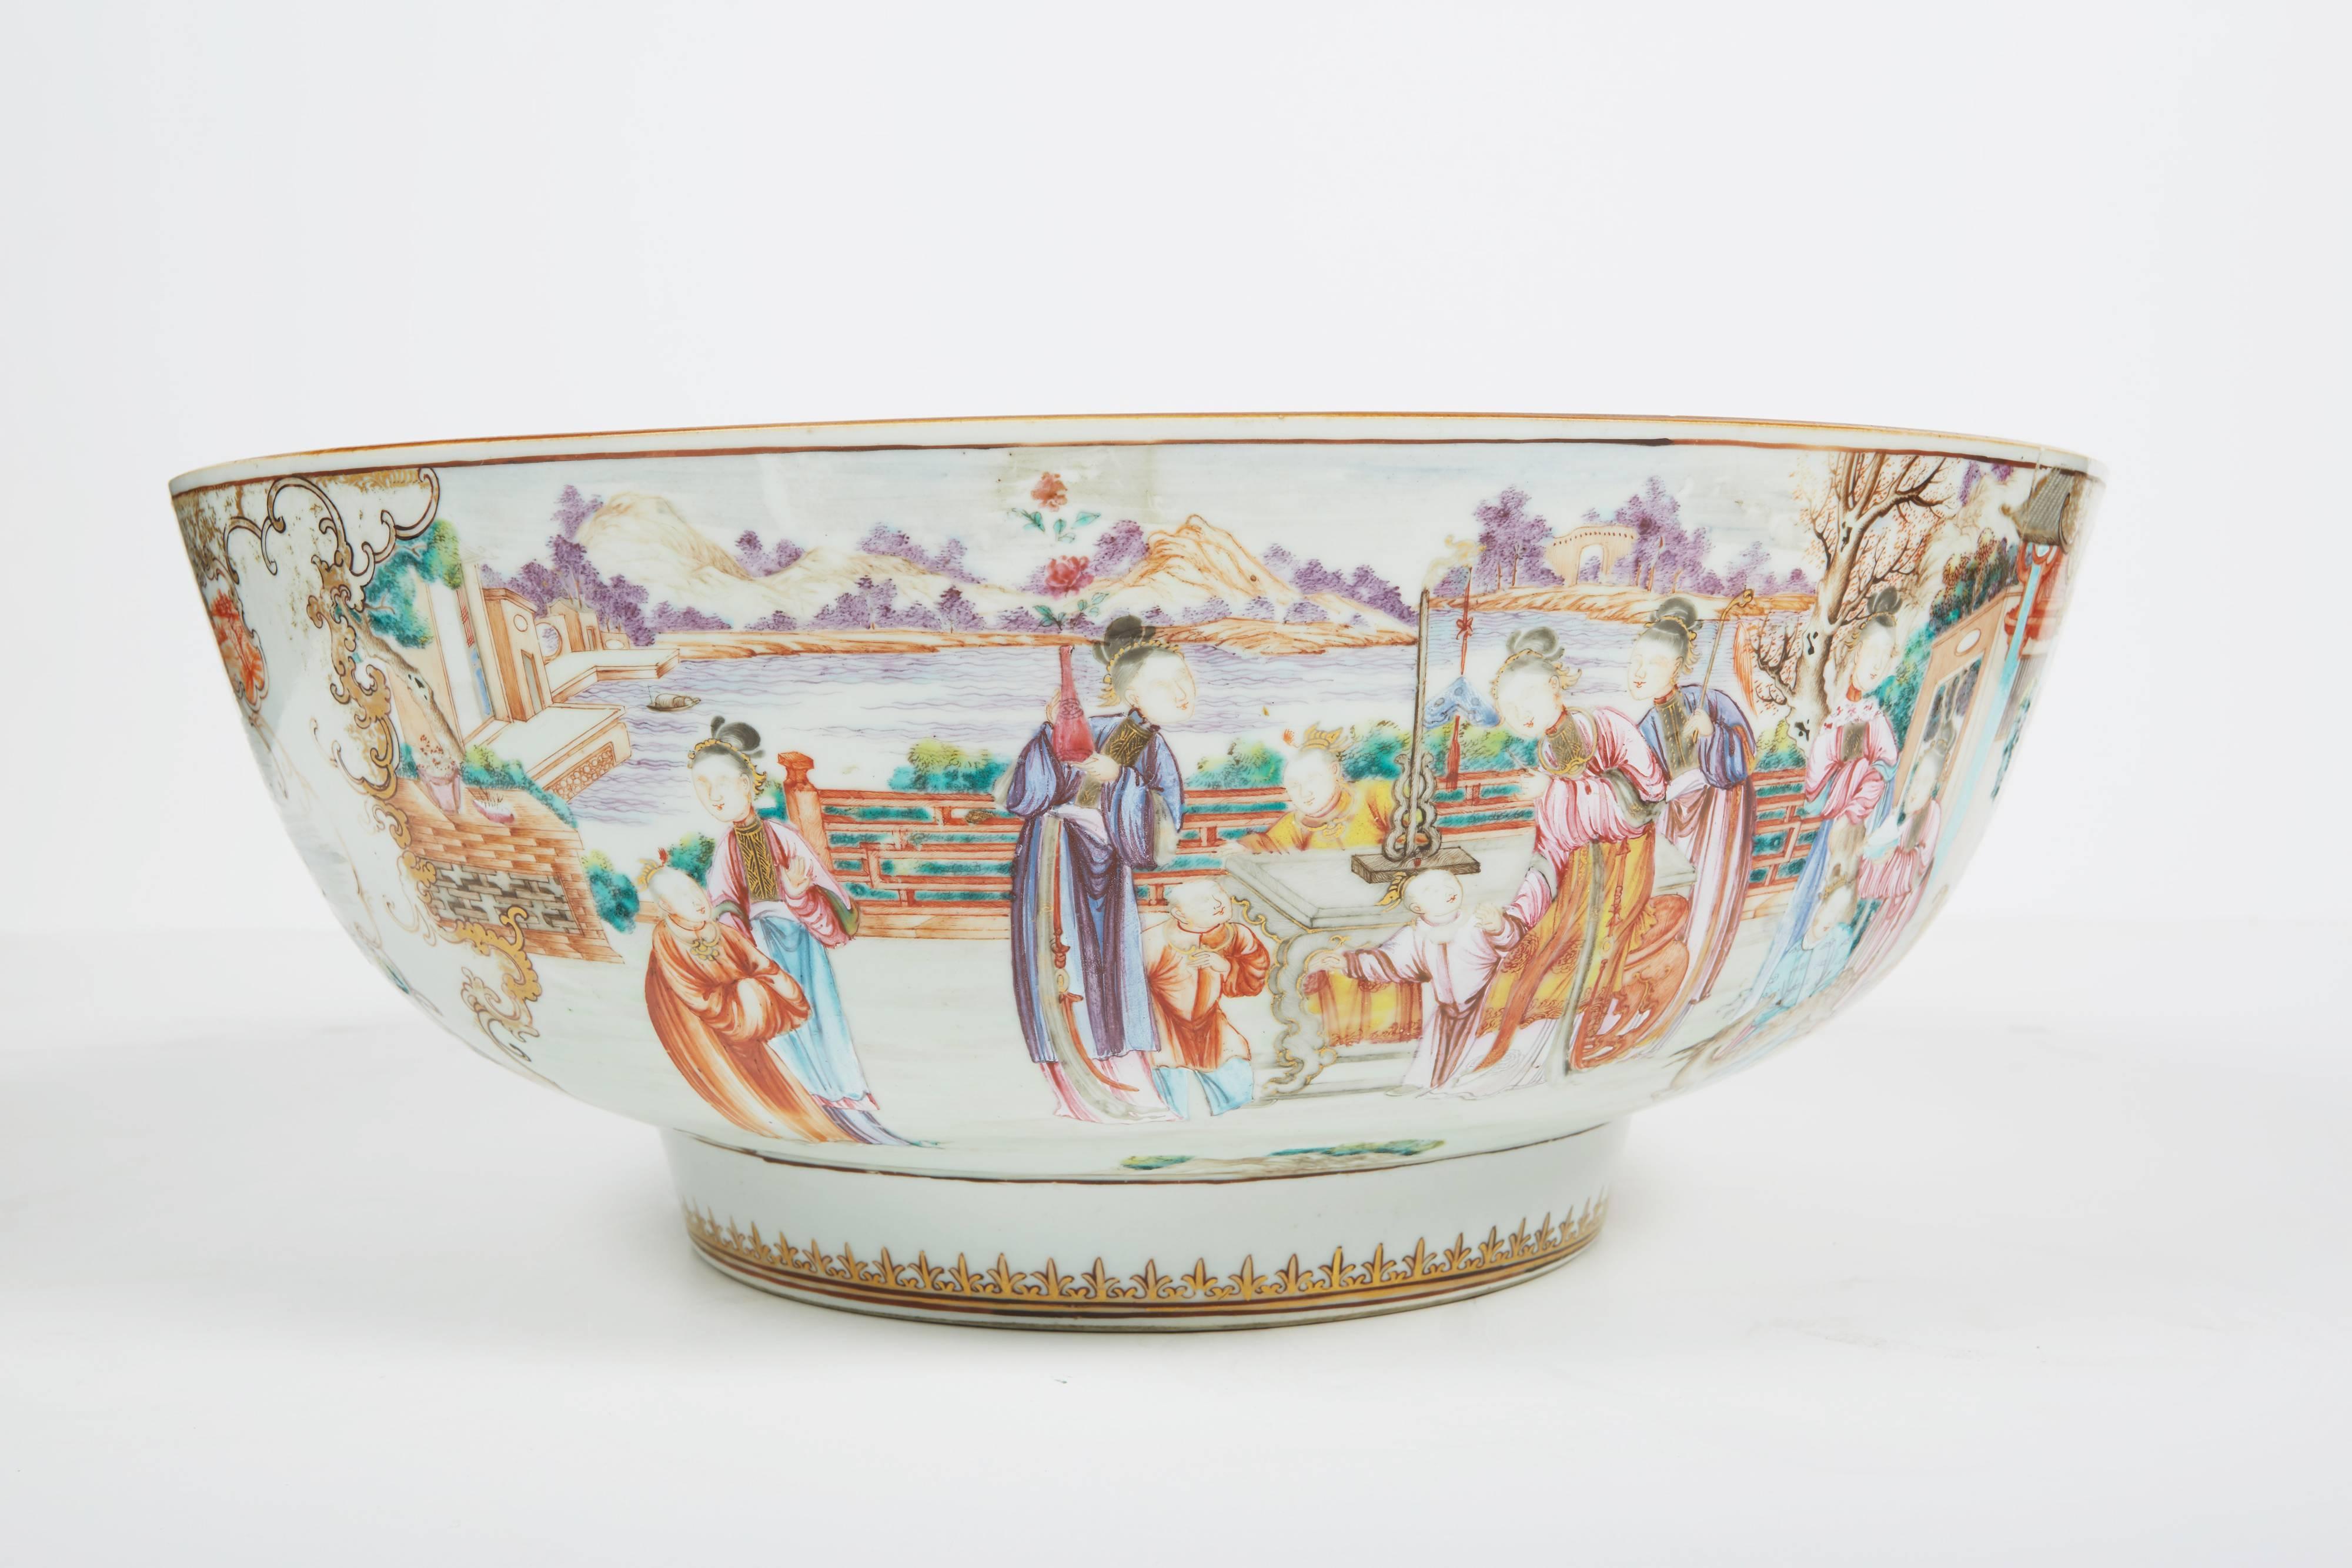 Large 18th century Chinese export punch bowl in the Rockefeller pattern (also known as Chinese Export Palace Ware). Elaborate gilt decoration with decorated larger reserves beautifully painted in a famille rose pallette showing Mandarin scenes and